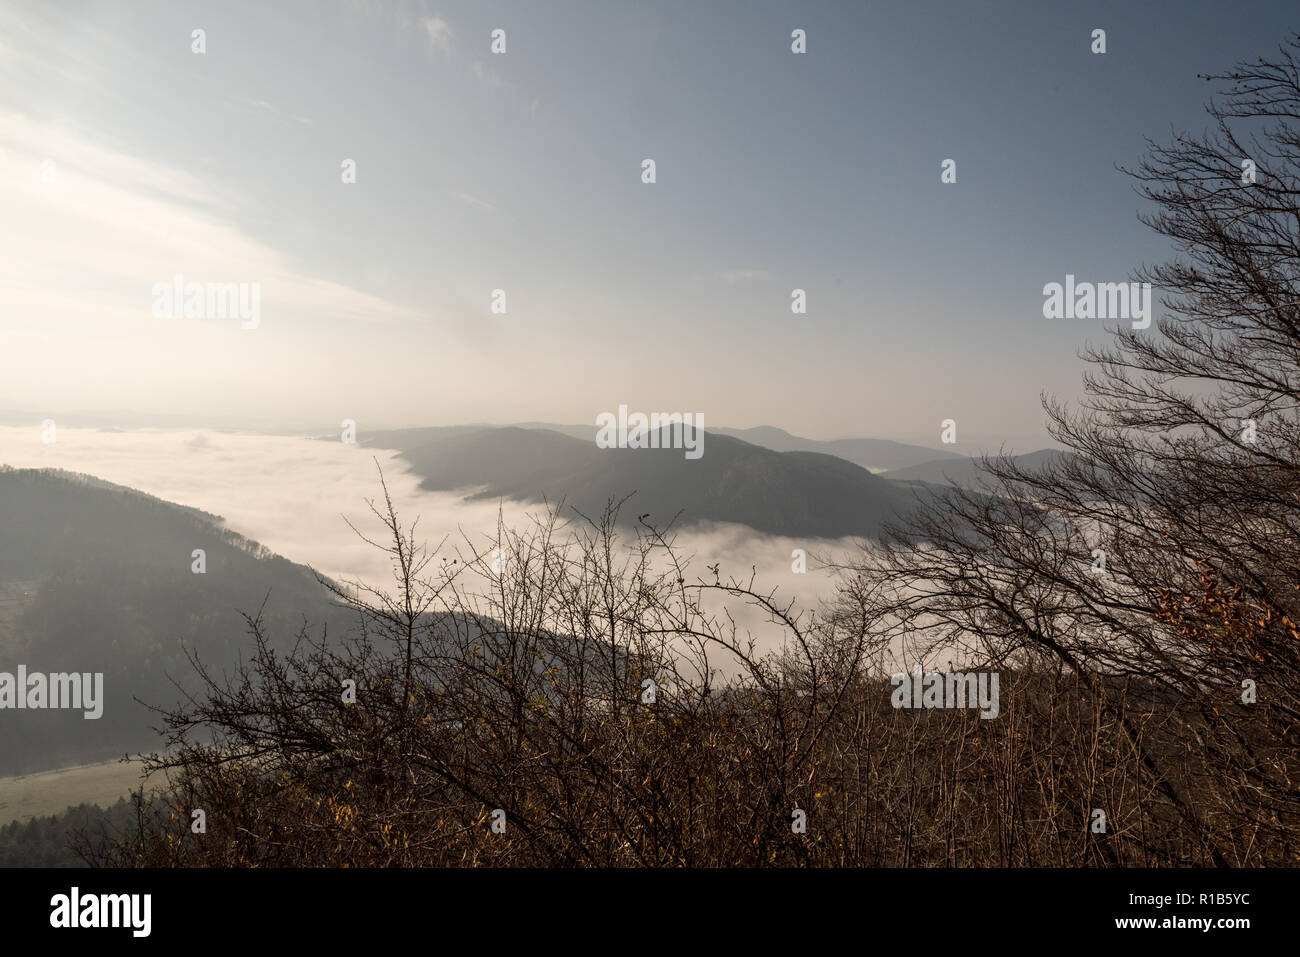 autumn mountain landscape with mist on Vah river valley, mountain ranges and blue sky from Klapy hill in Javorniky mountains near Povazska Bystrica ci Stock Photo